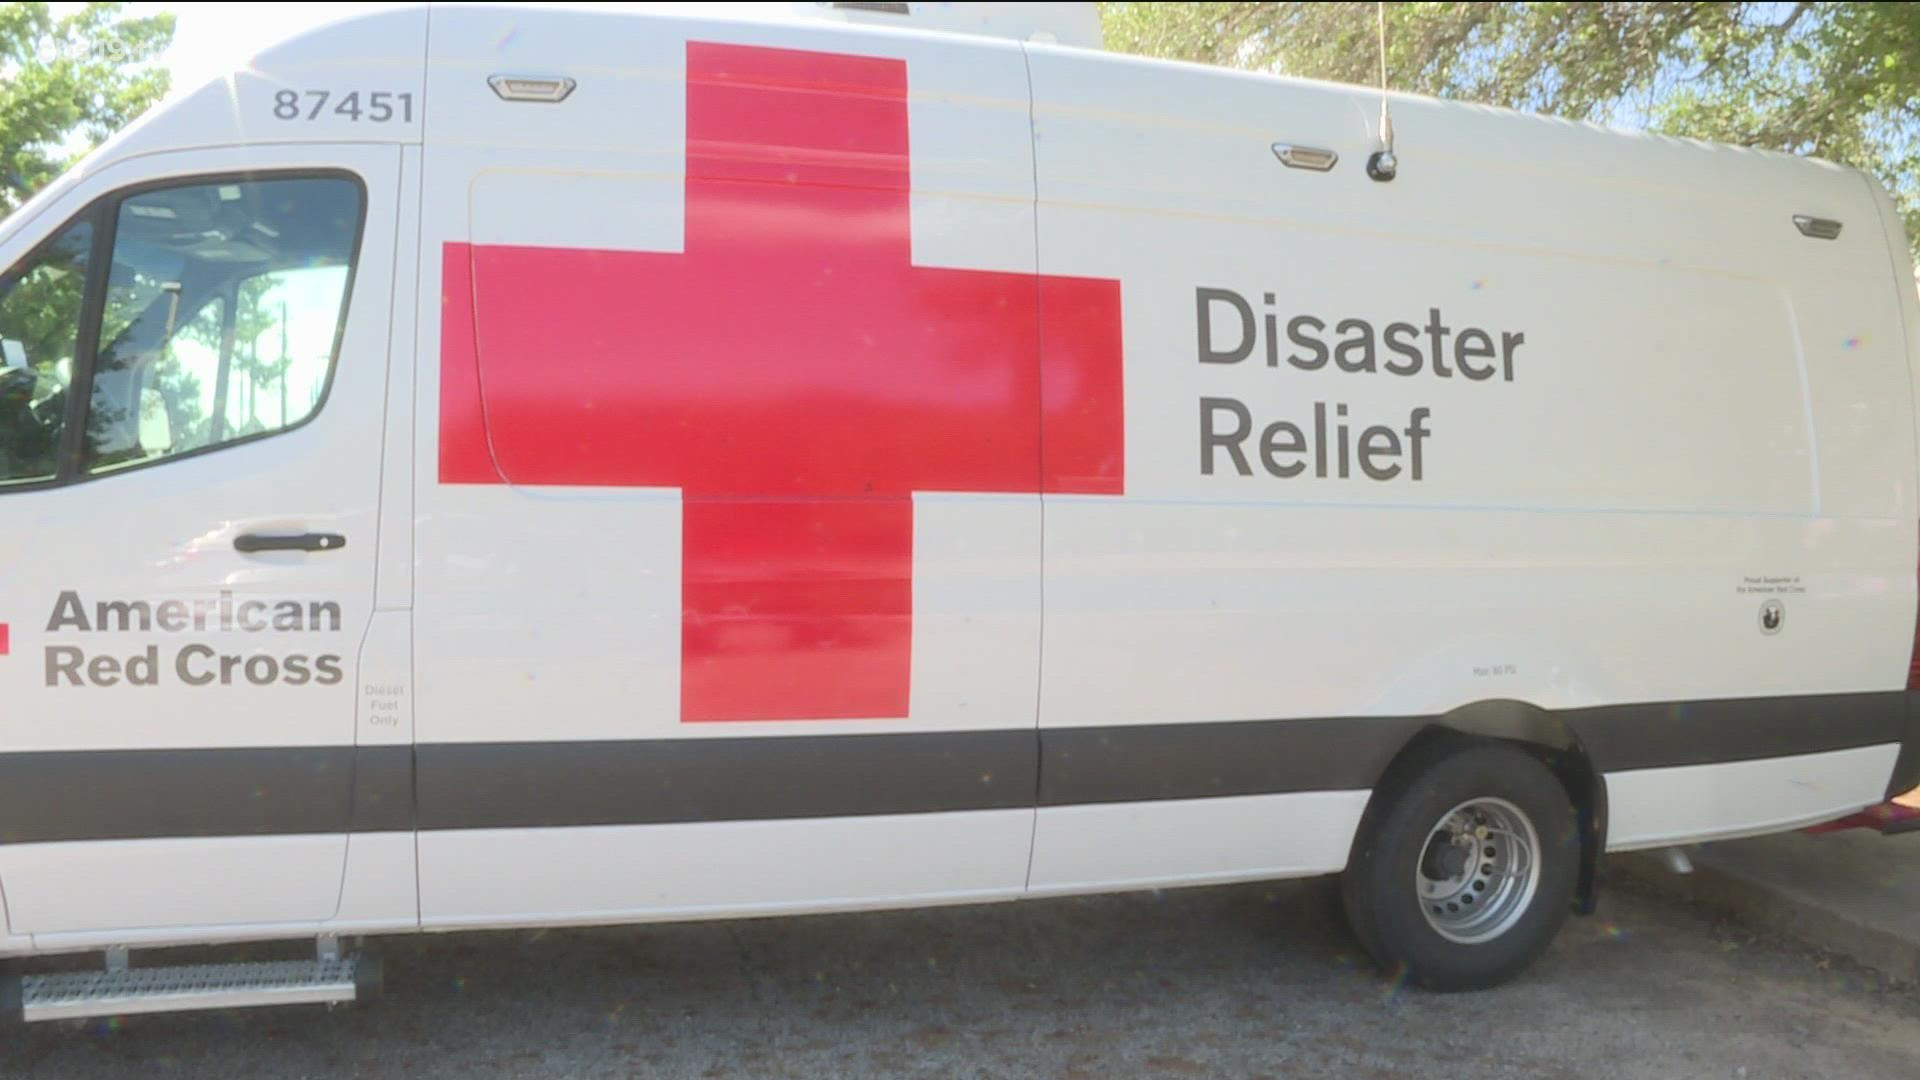 The organization sent 500 volunteers prior to landfall. Since then, they've started sending their emergency disaster relief teams.